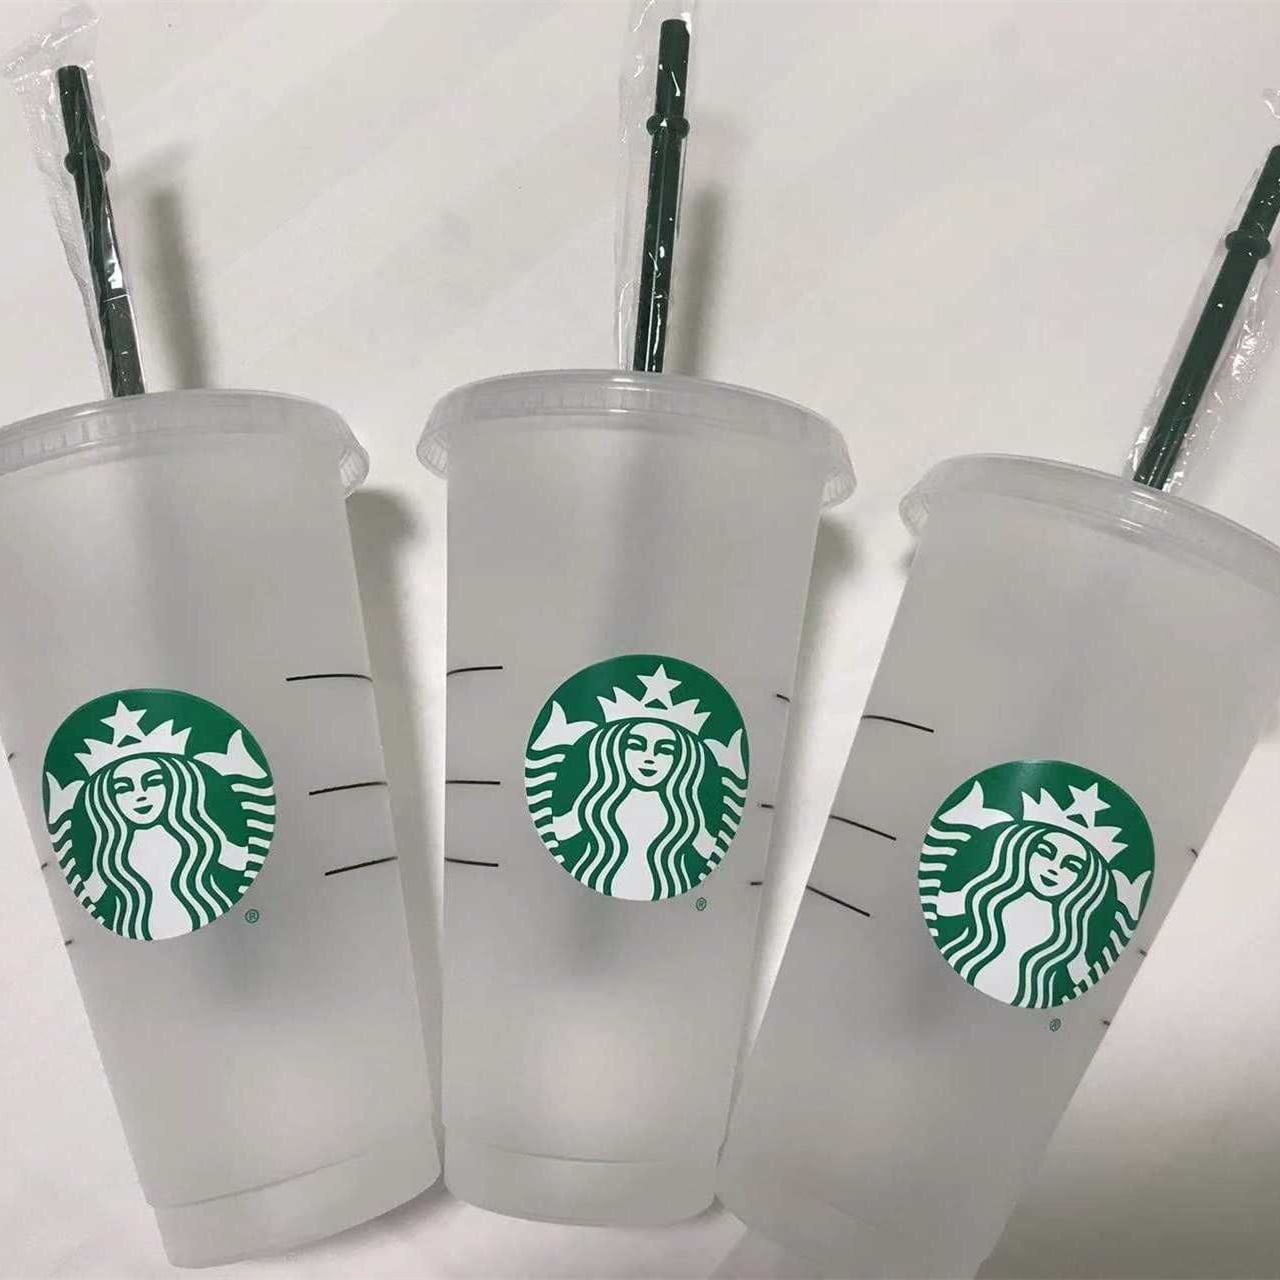 Glass Drinking Straws - for Starbucks Vende cups and other small holed lids